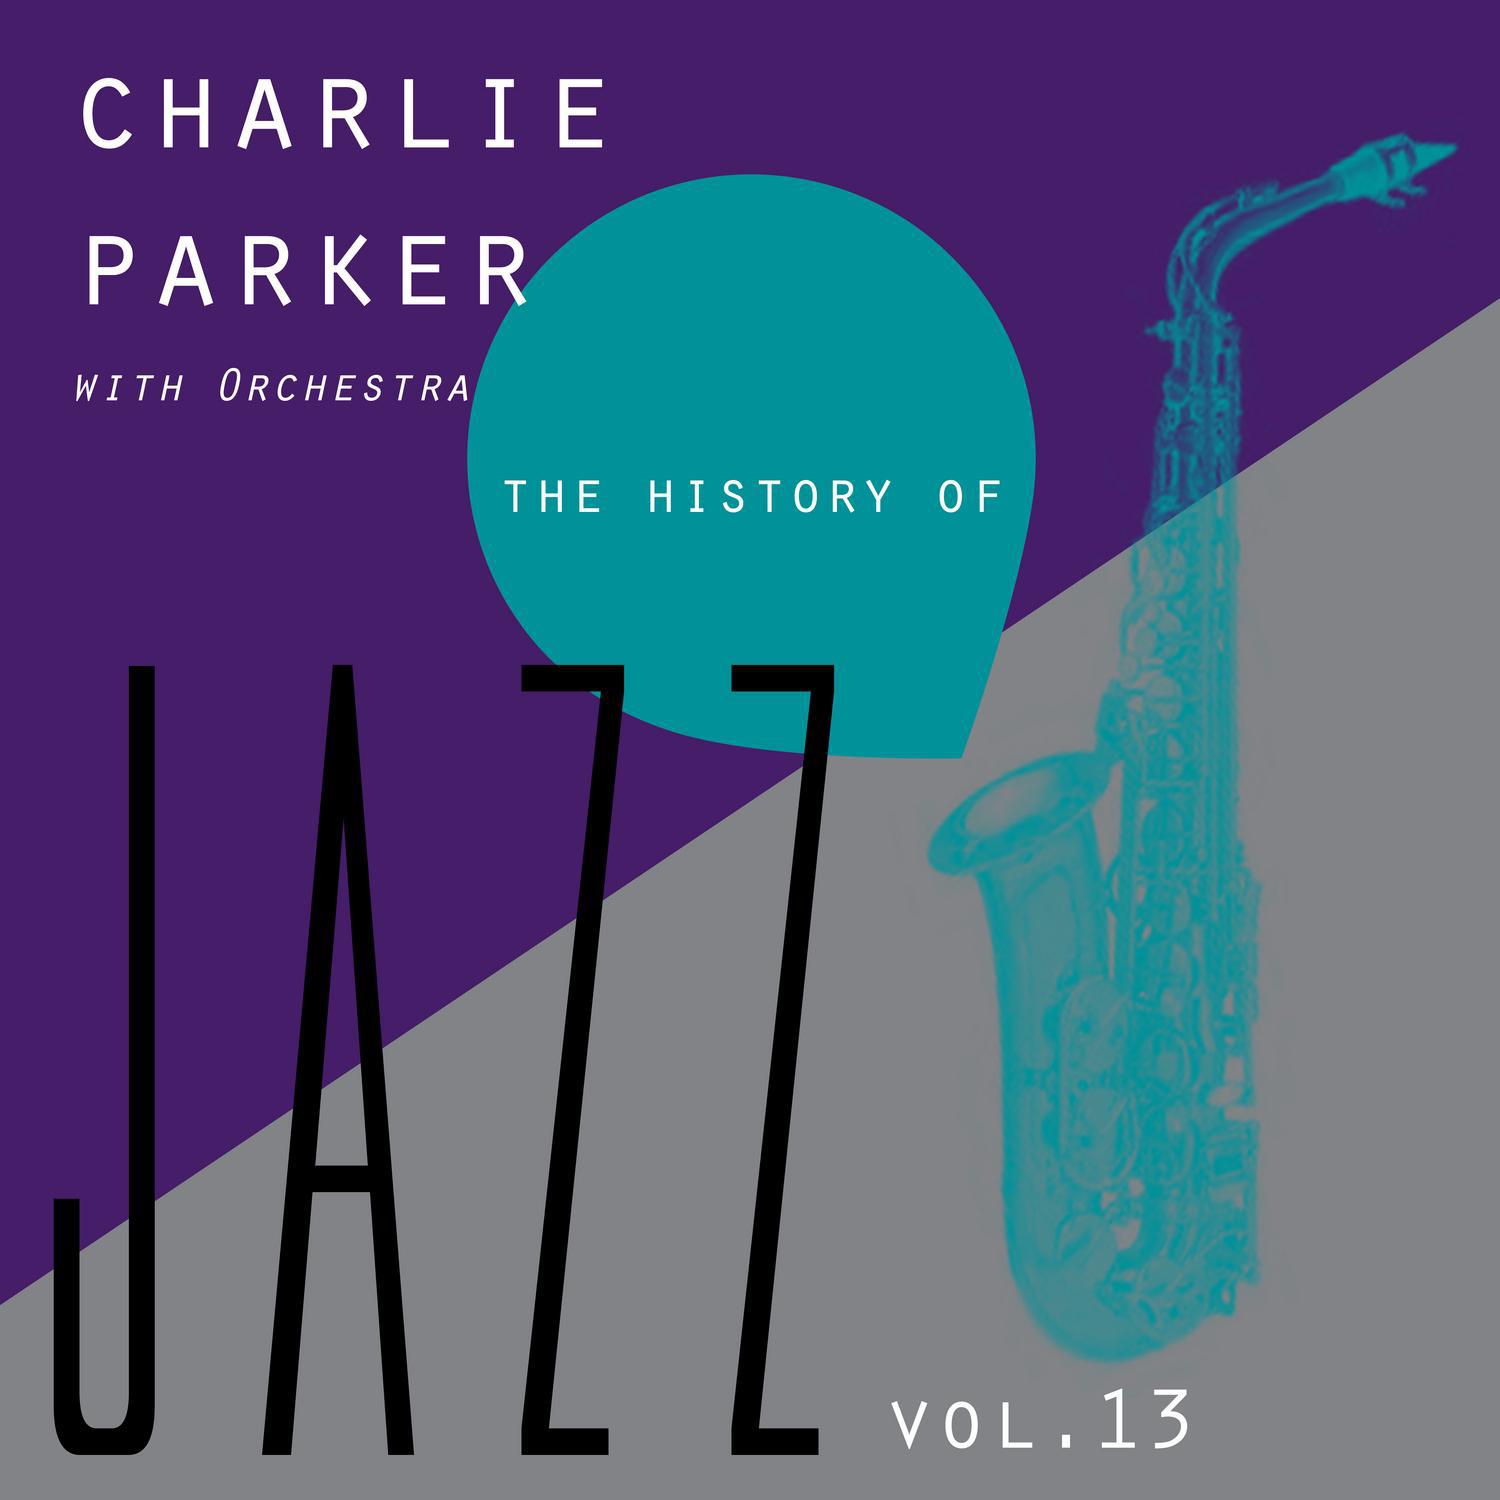 The History of Jazz Vol. 13